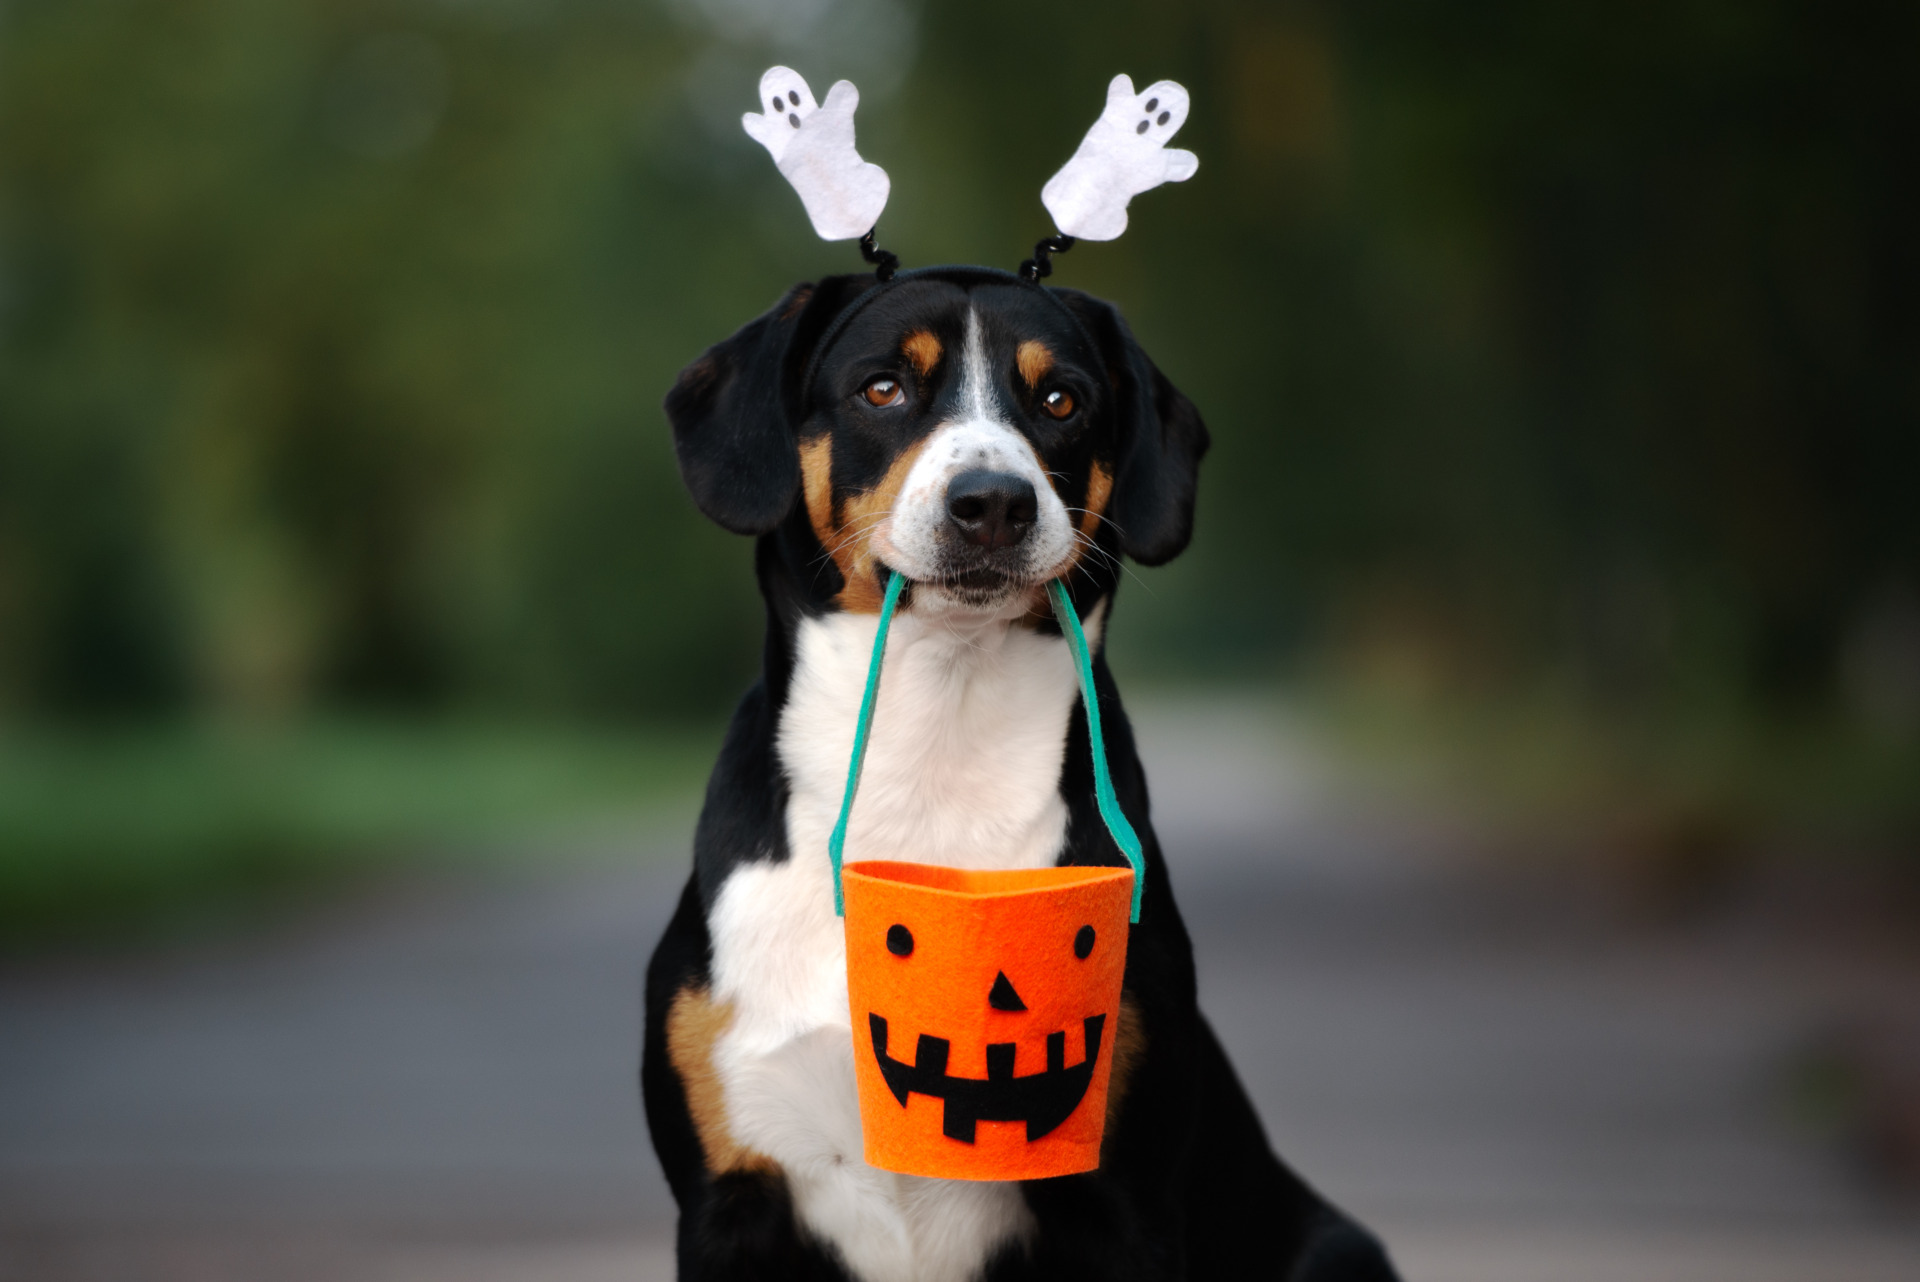 Avoid a night of fright for your dogs